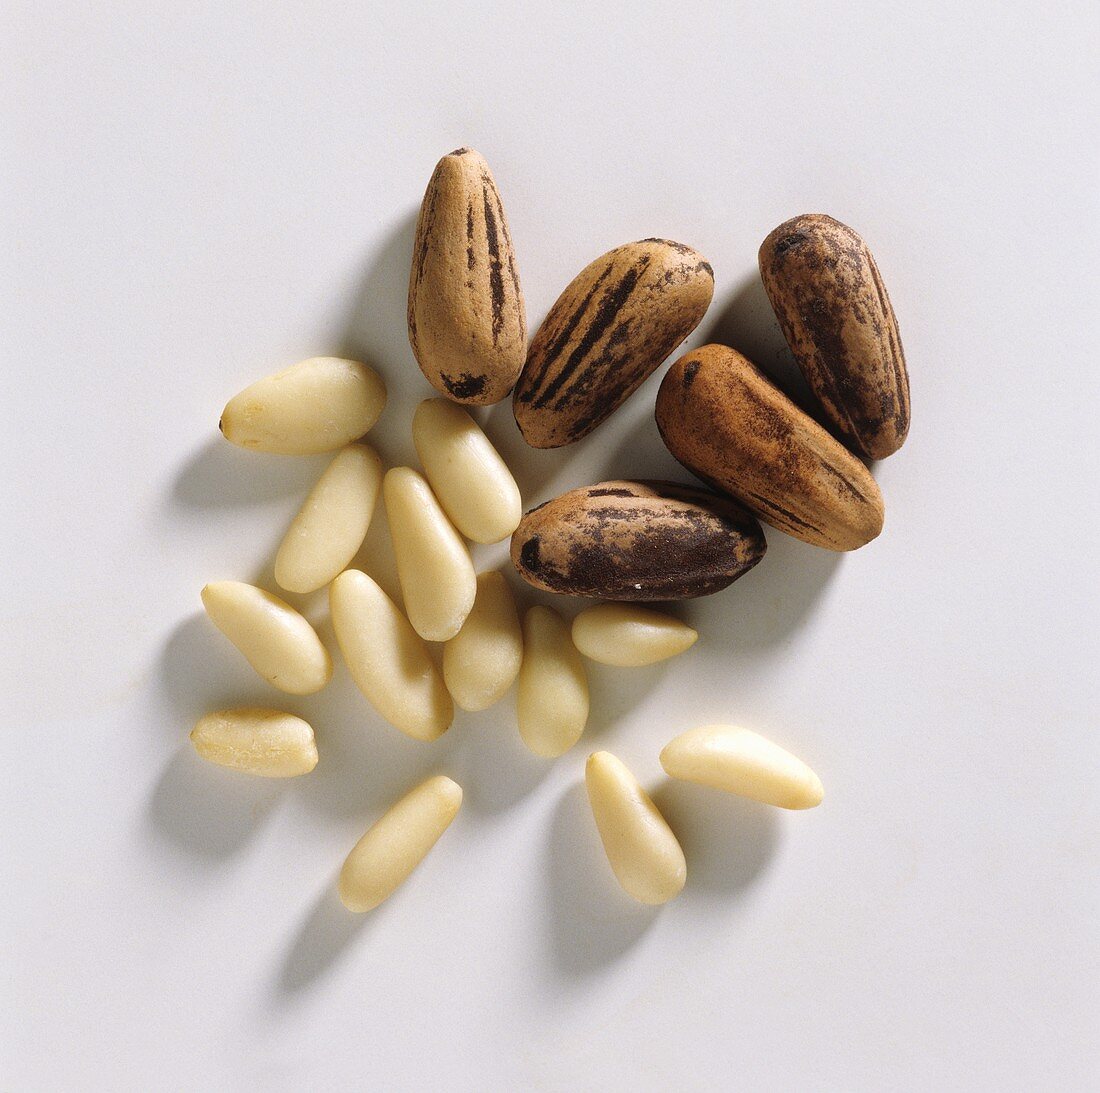 Pine nuts, shelled and unshelled